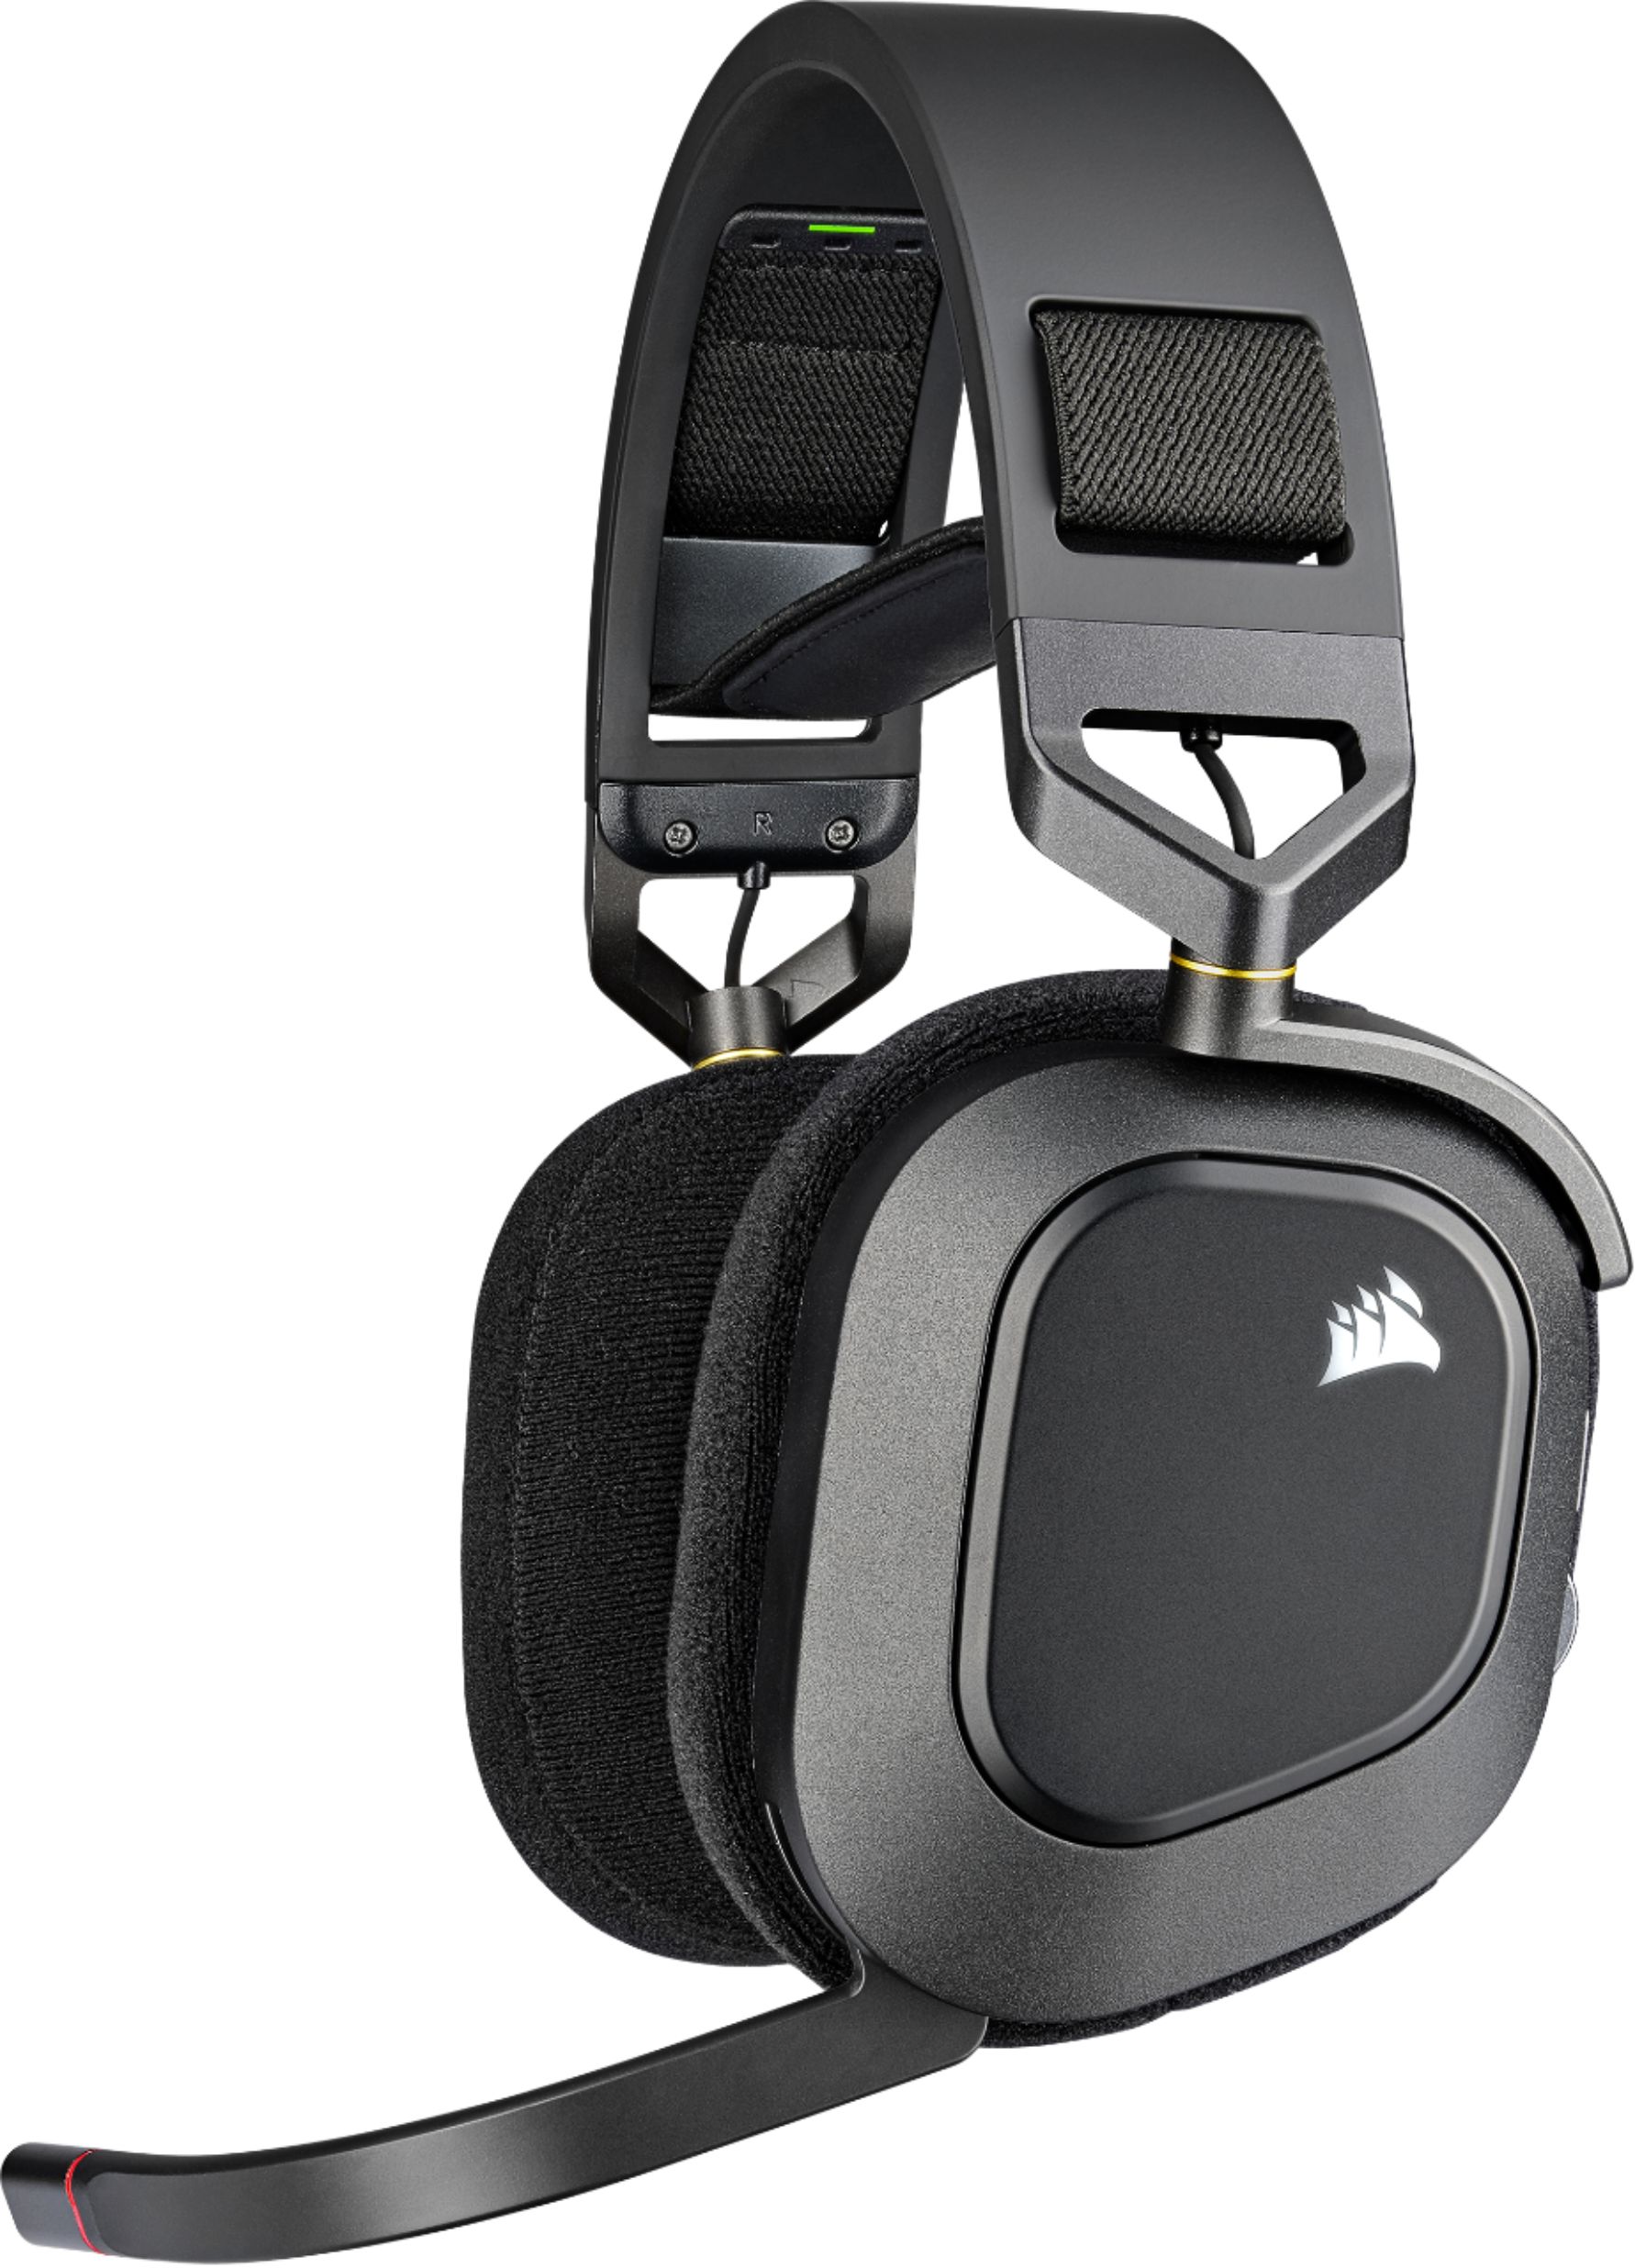 motor Baron middelen CORSAIR HS80 RGB WIRELESS Dolby Atmos Gaming Headset for PC, Mac, PS5|PS4  with Broadcast-Grade Omni-Directional Microphone Carbon CA-9011235-NA -  Best Buy